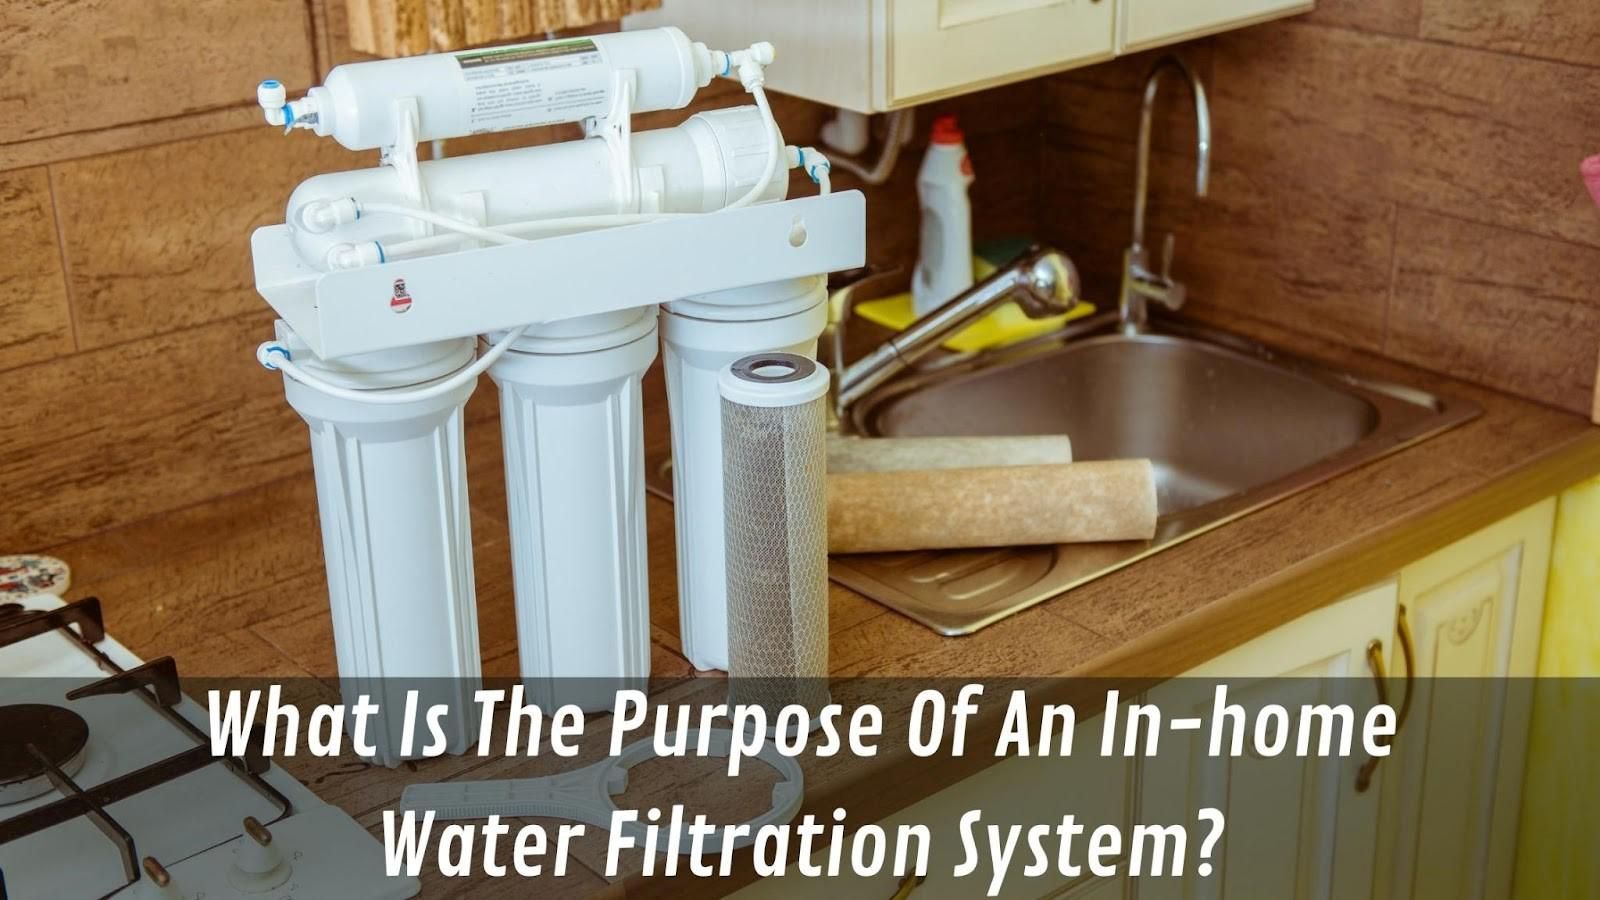 What Is The Purpose Of An In-home Water Filtration System?